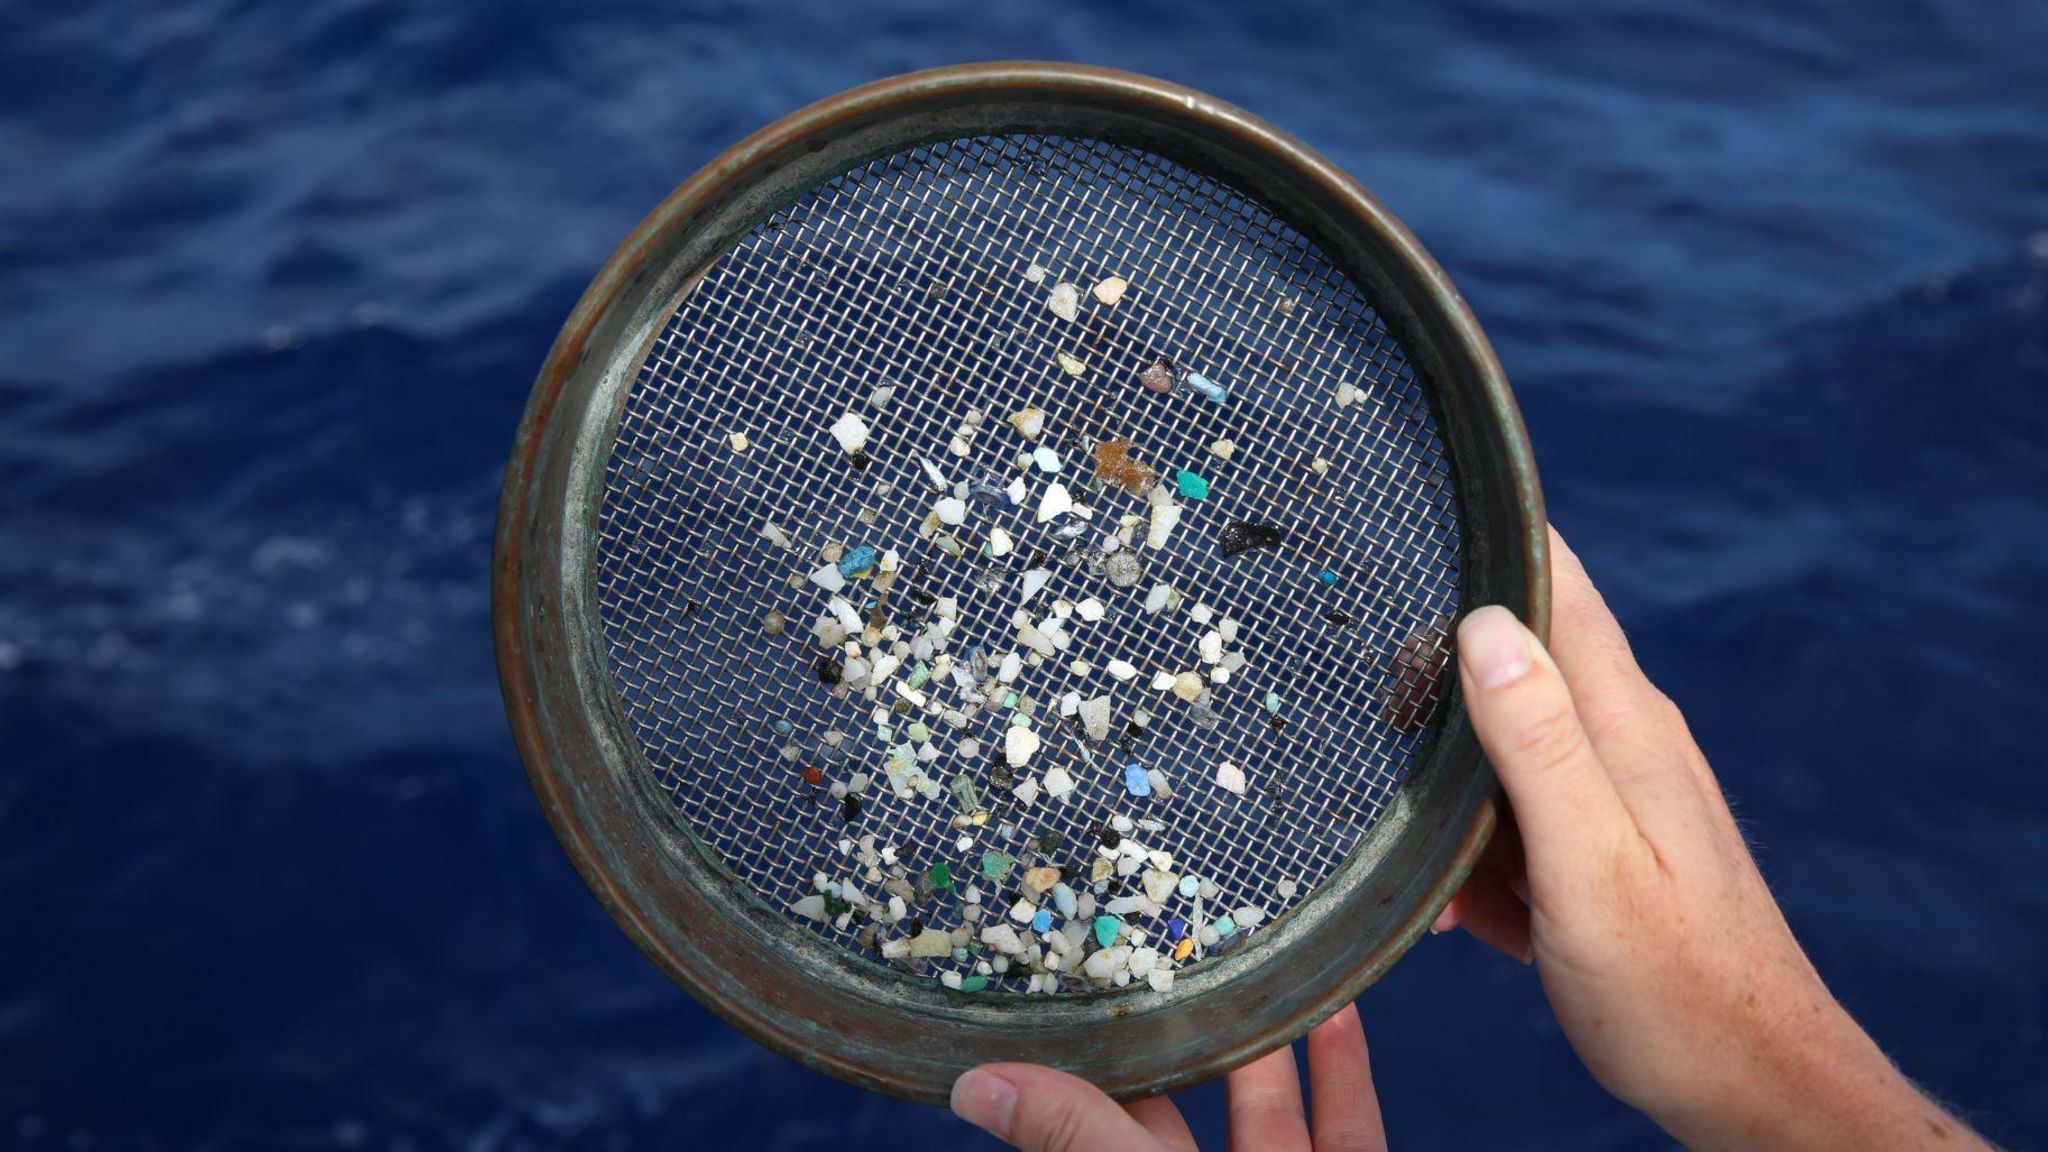 Microplastic samples in a sieve collected from the trawl in the Great Pacific Garbage Patch